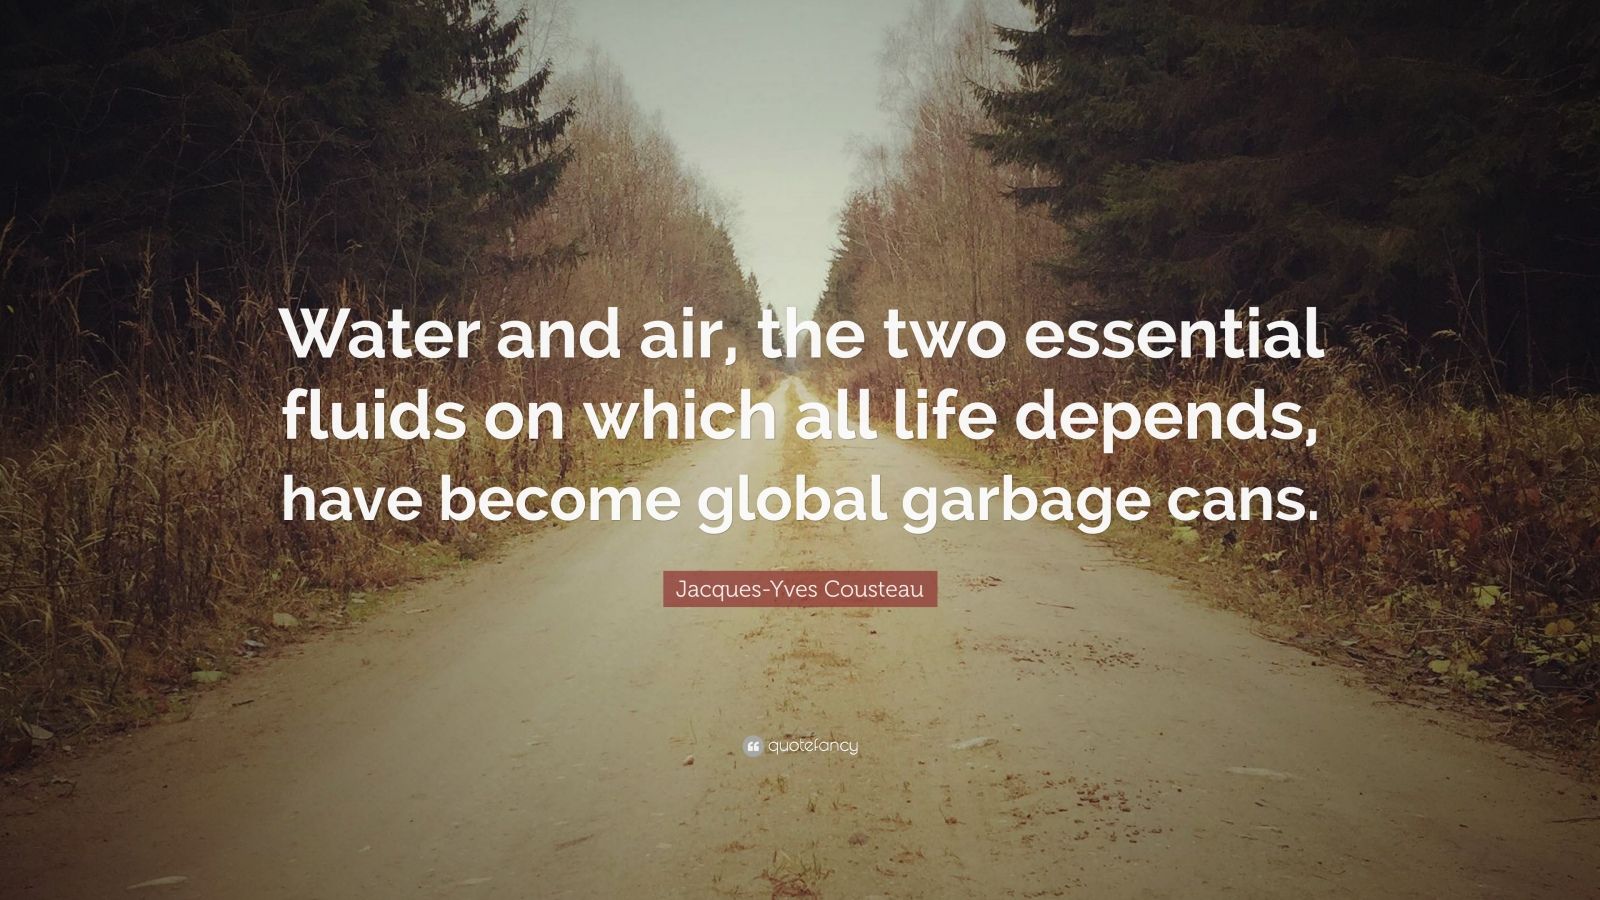 Jacques-Yves Cousteau Quote: “Water and air, the two essential fluids ...